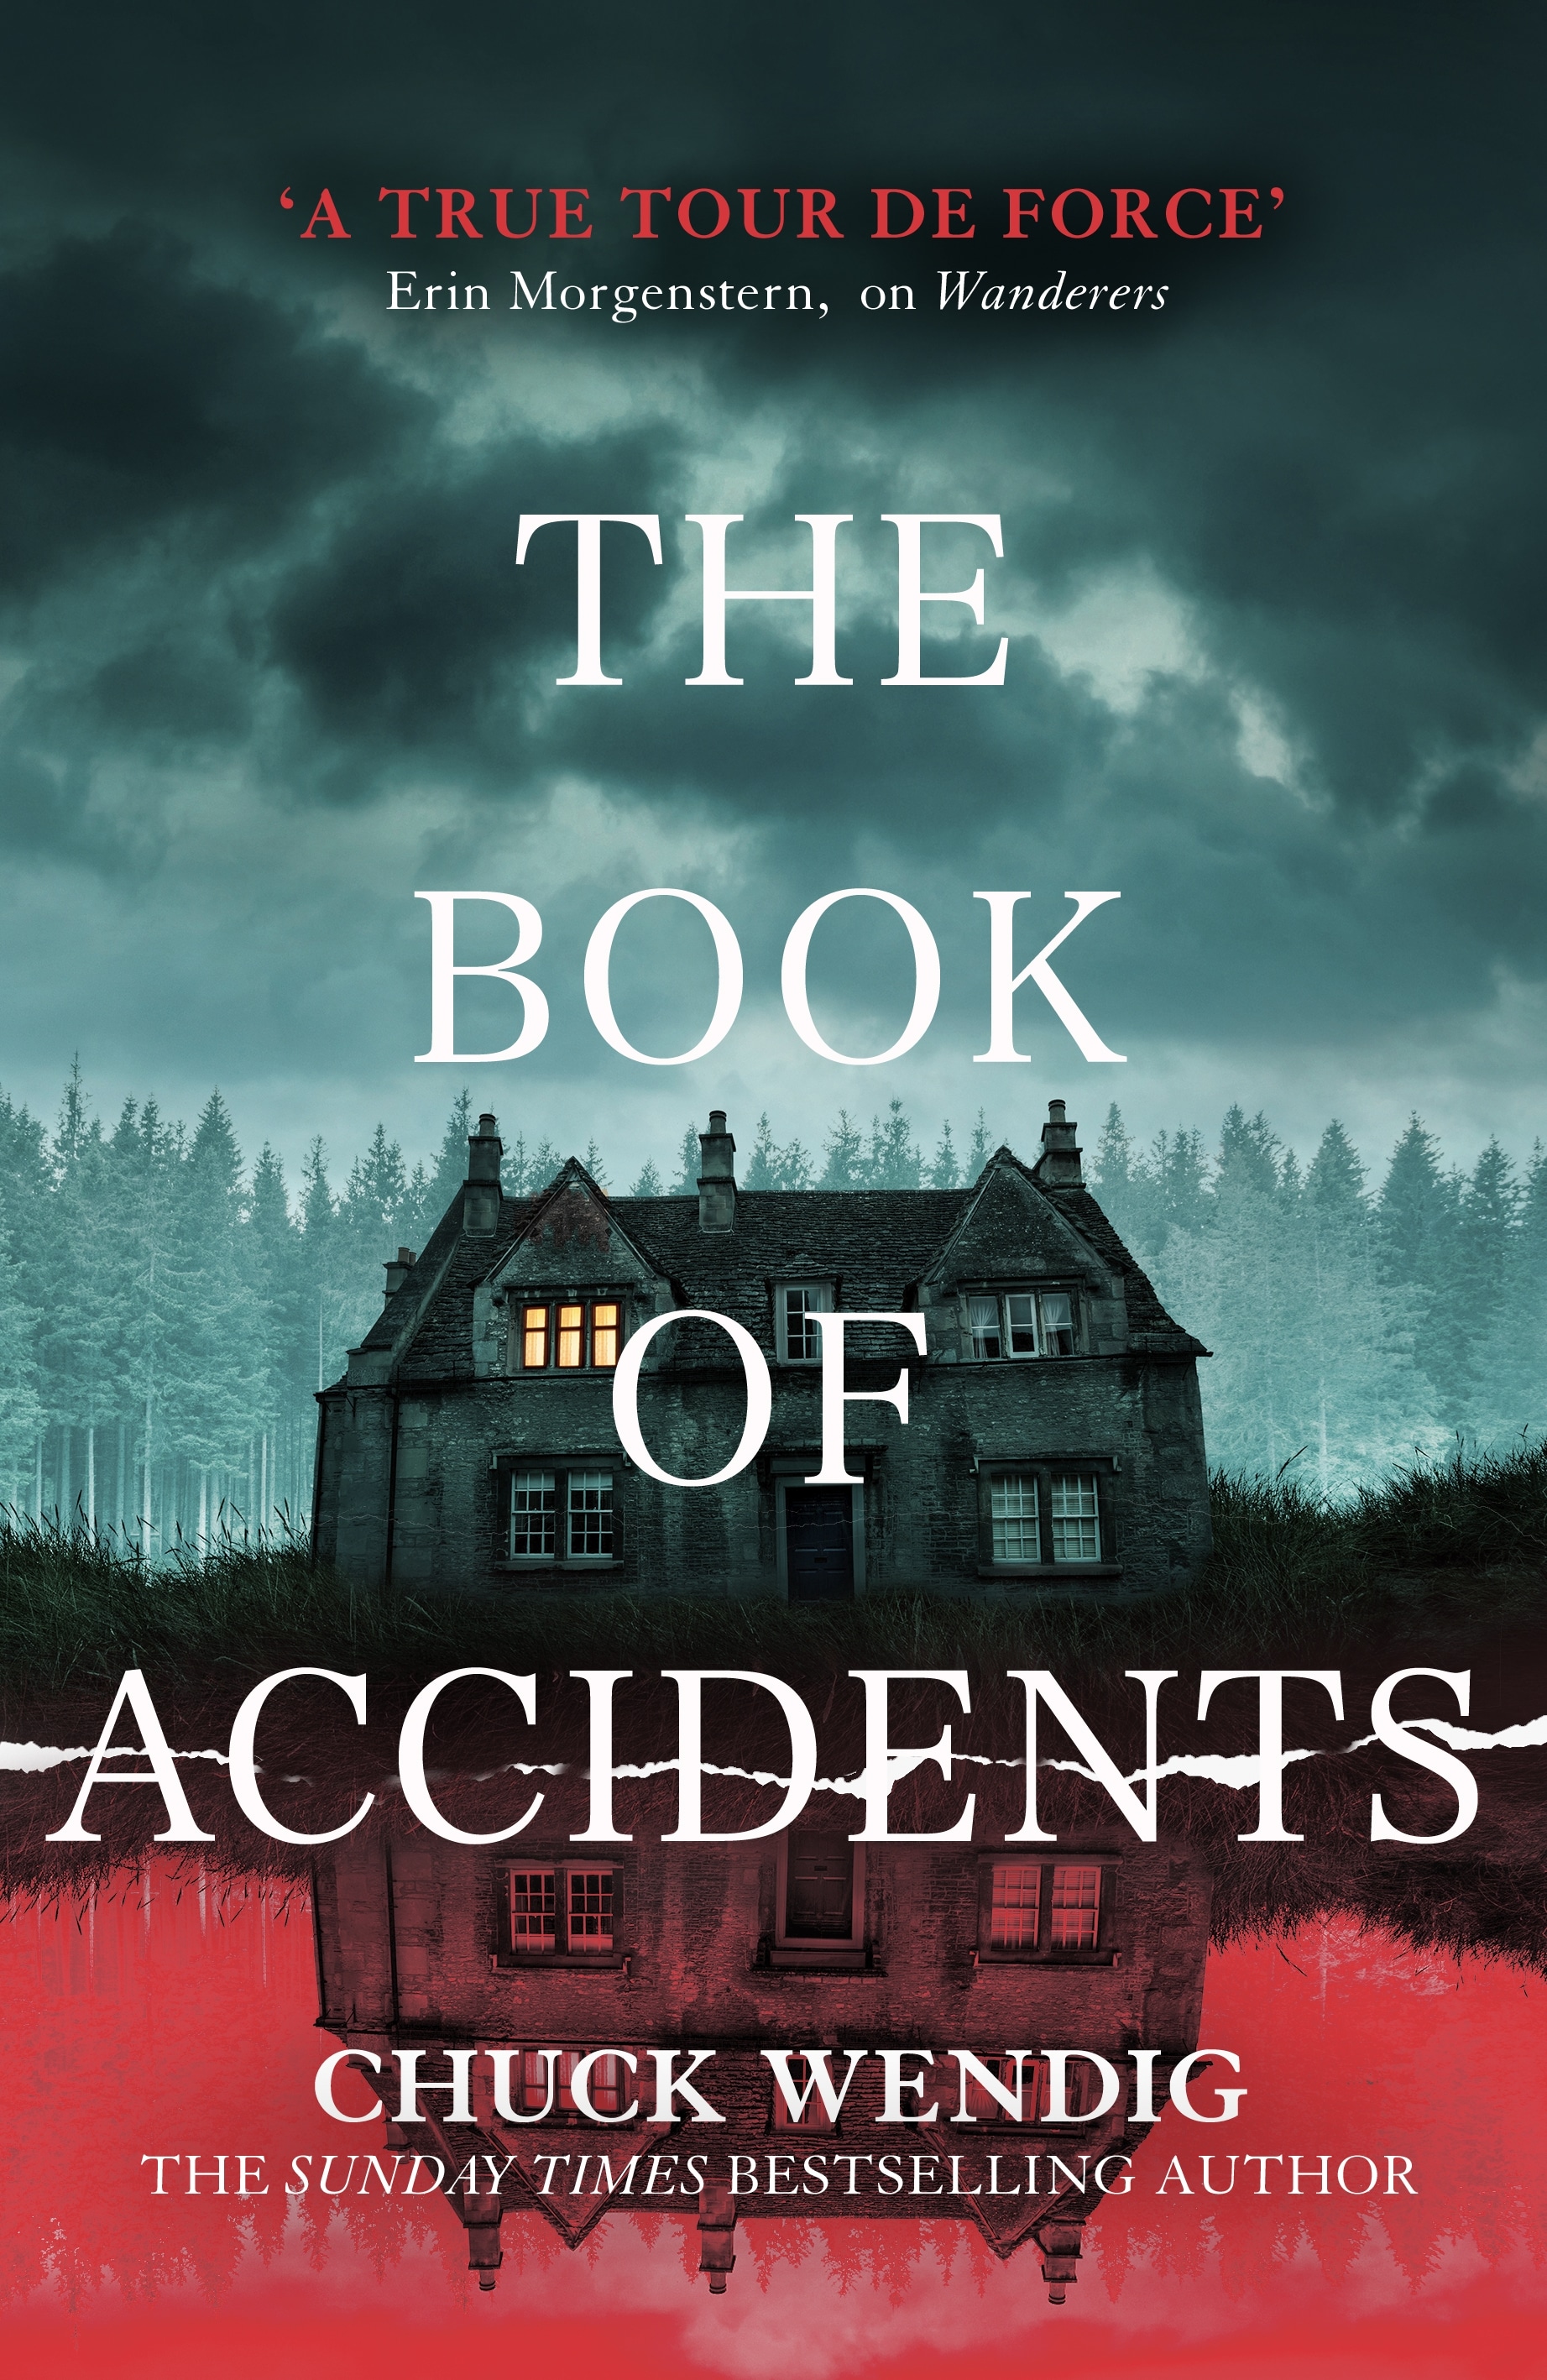 Book “The Book of Accidents” by Chuck Wendig — April 21, 2022